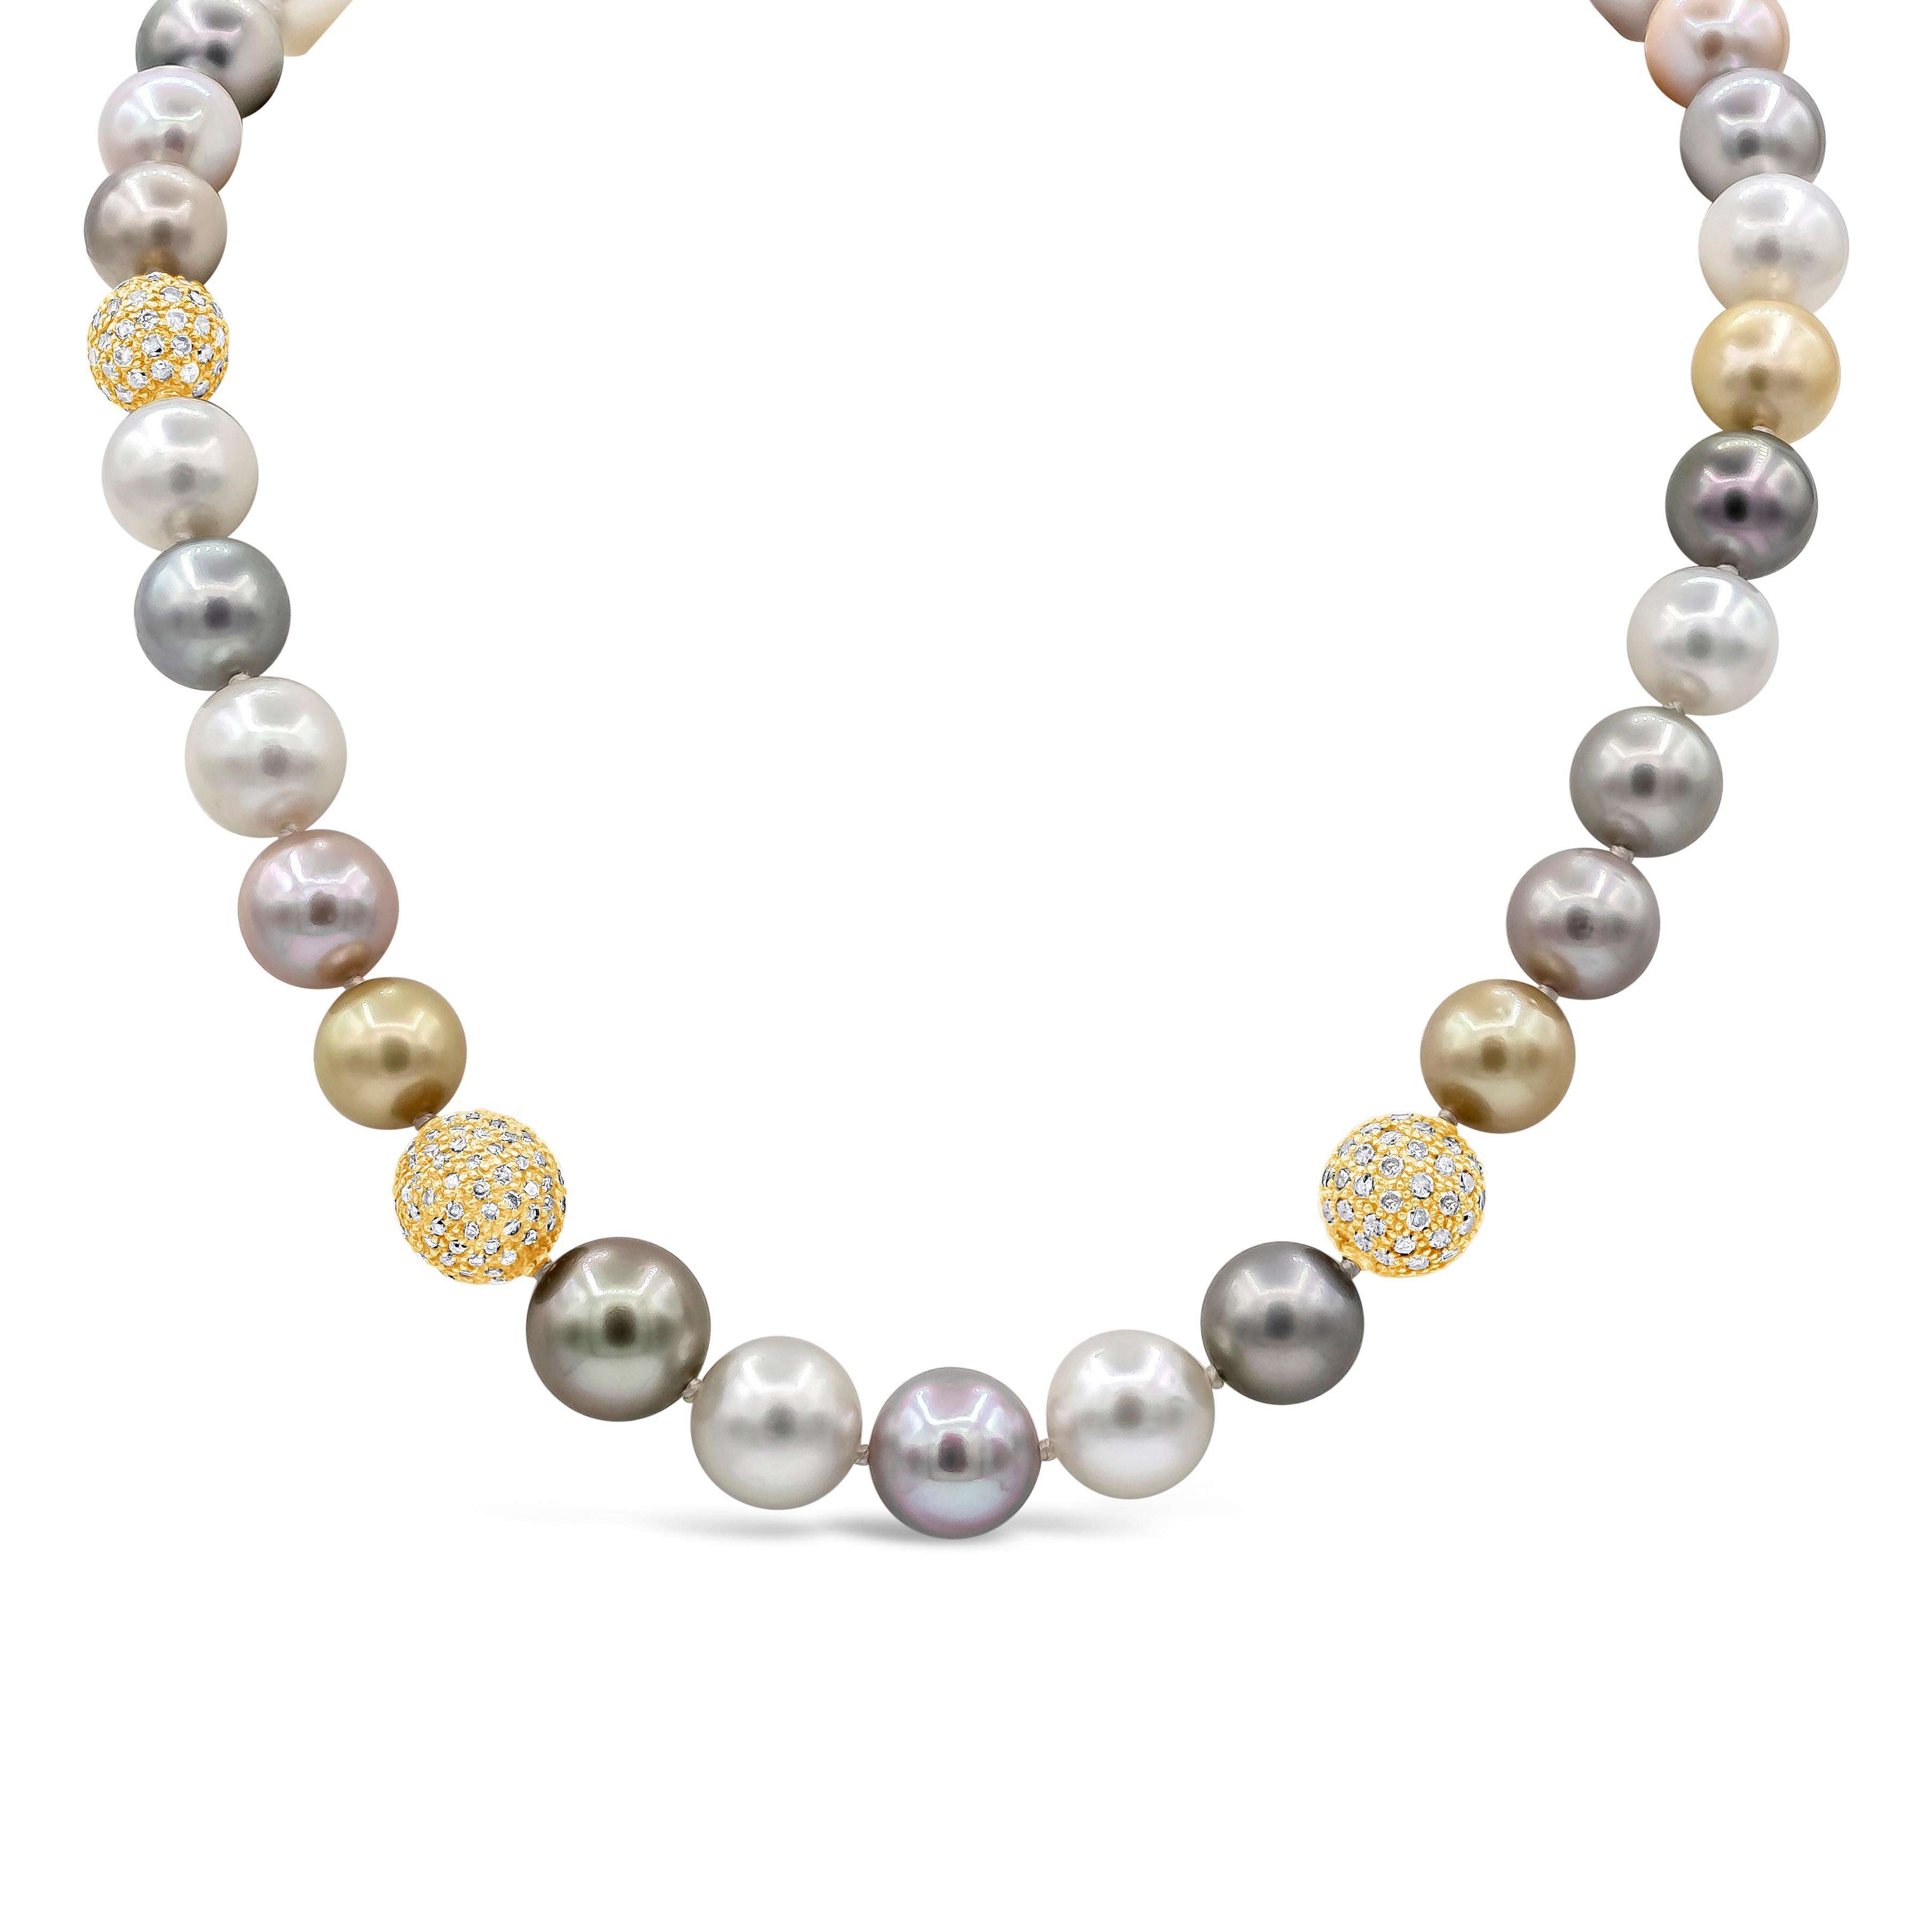 Showcasing a colorful combination of South Sea and freshwater pearls in a single strand necklace. Spaced by four 18 karat yellow gold beads encrusted with diamonds (7.00 carats total). Pearls are approximately 11.20 - 13.60 millimeters.

